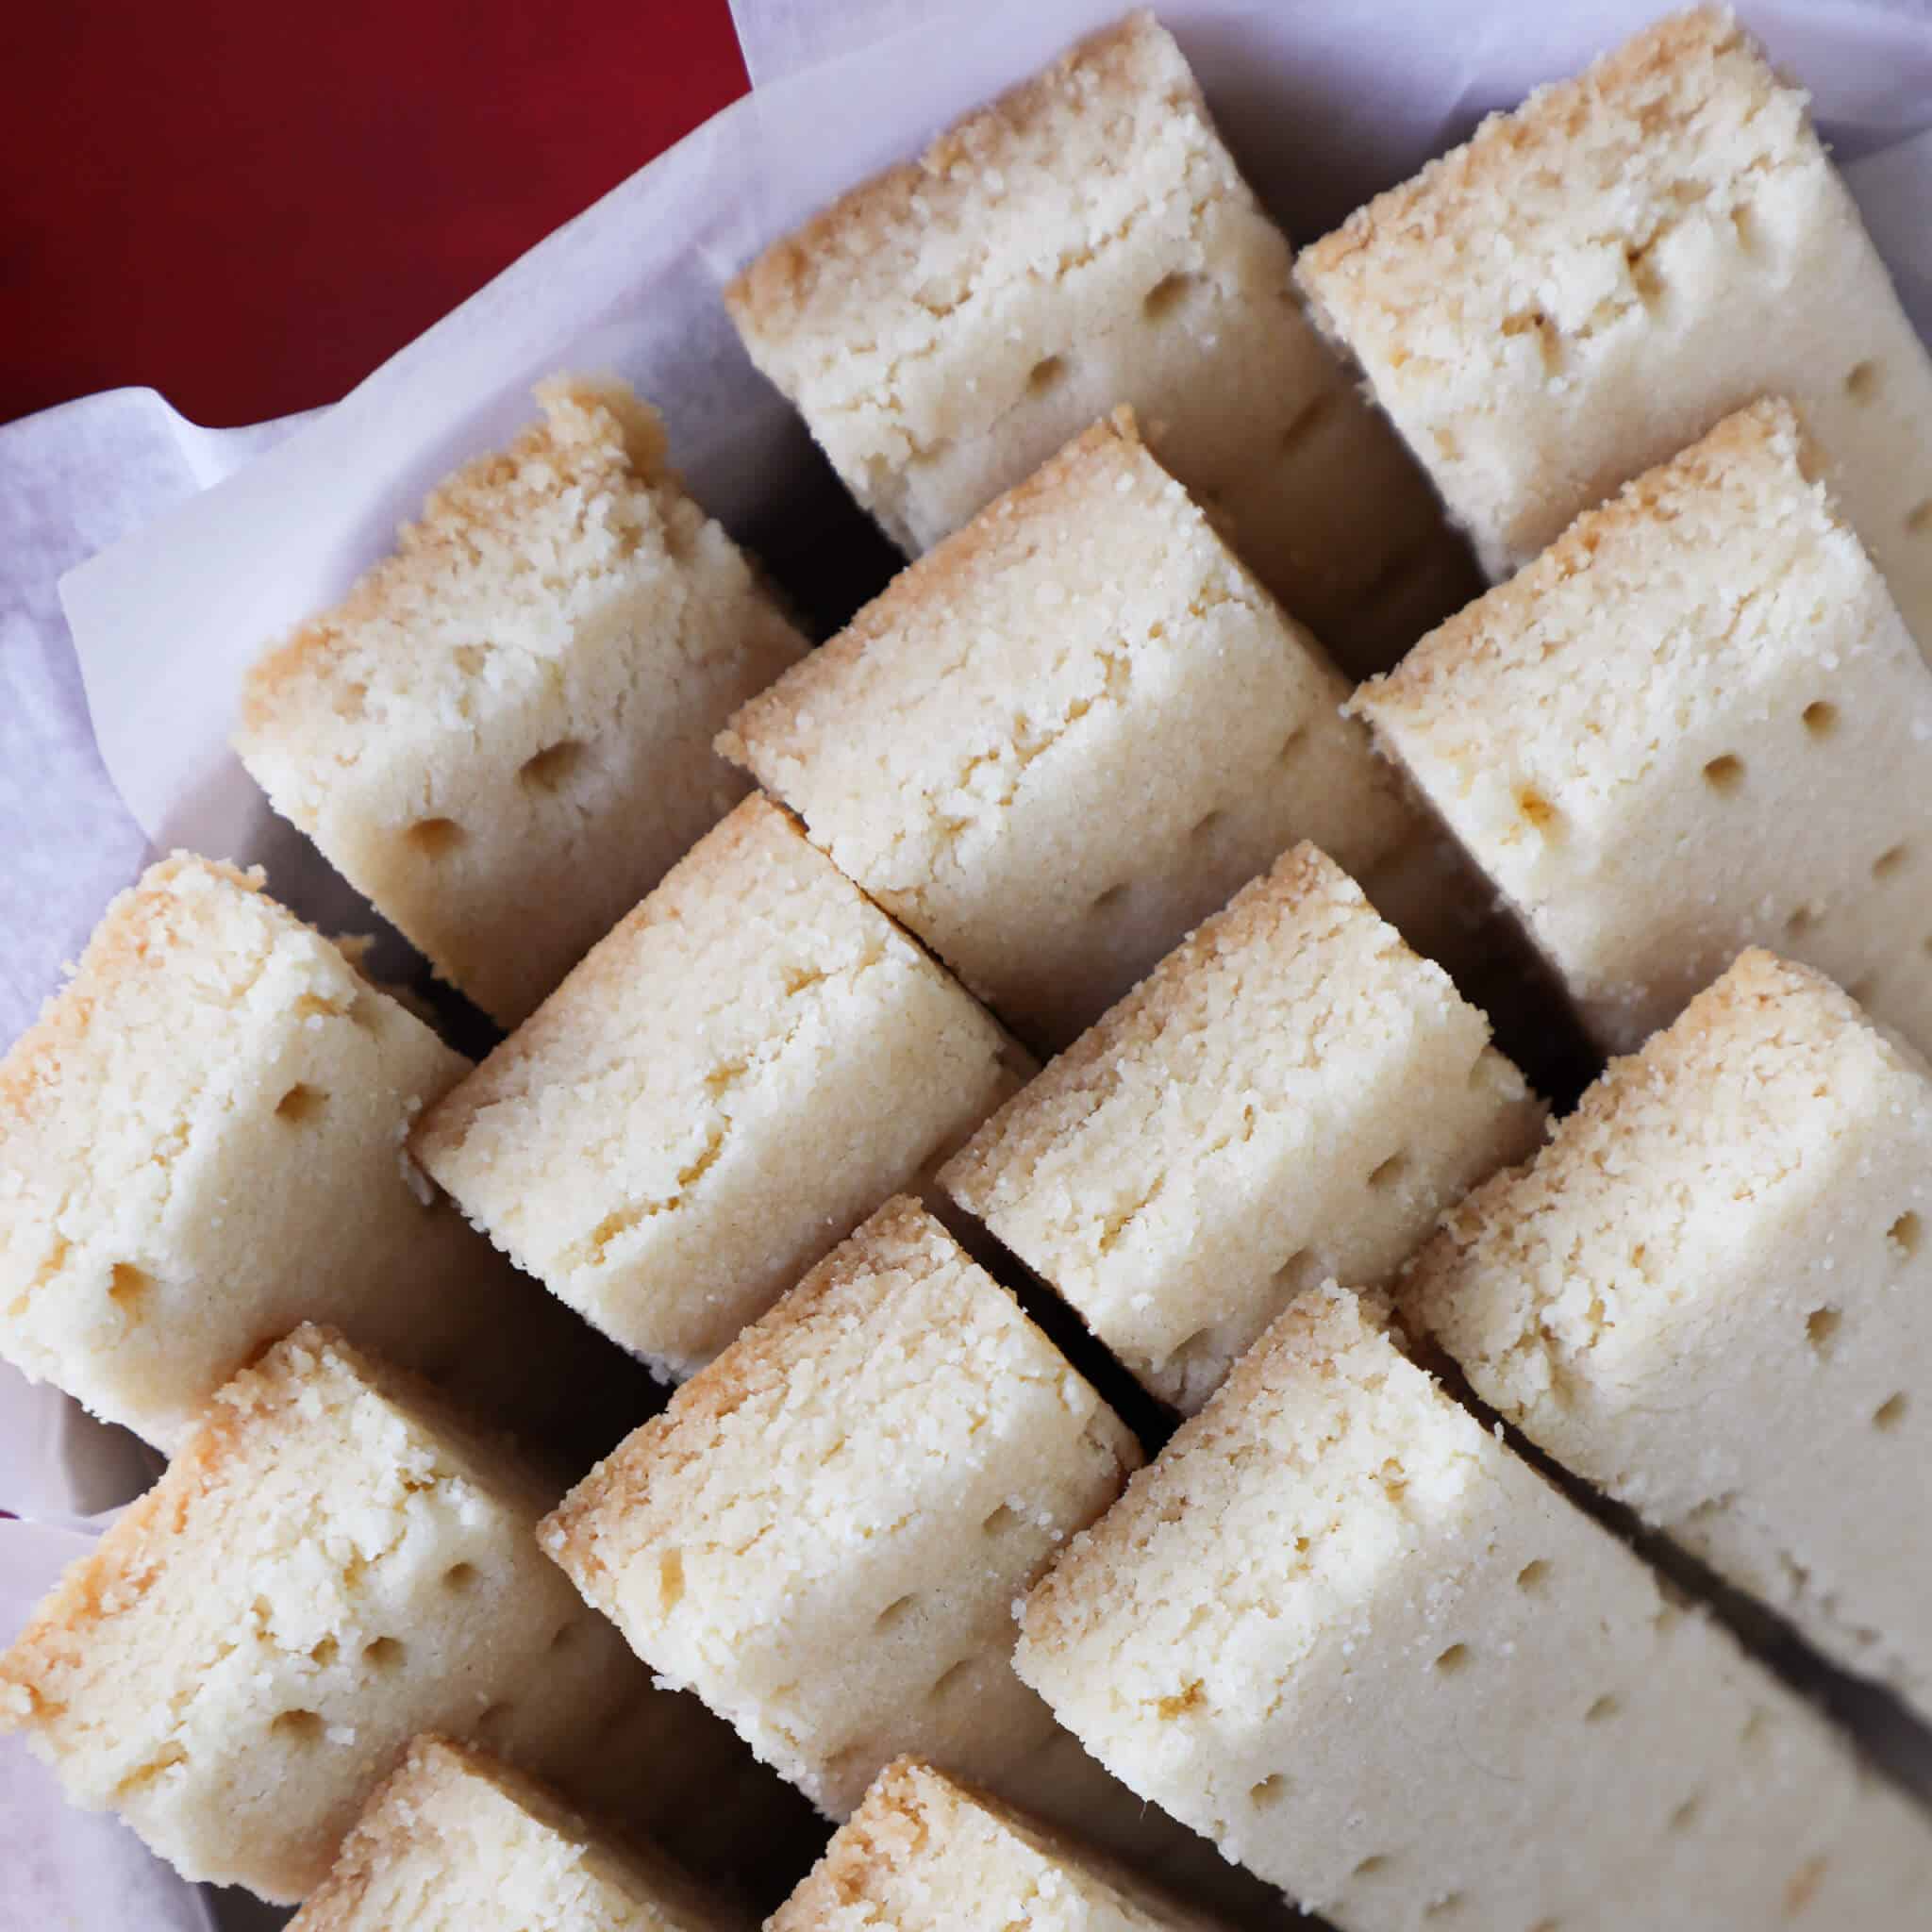 A group of scottish shortbread baked and placed in a basket.